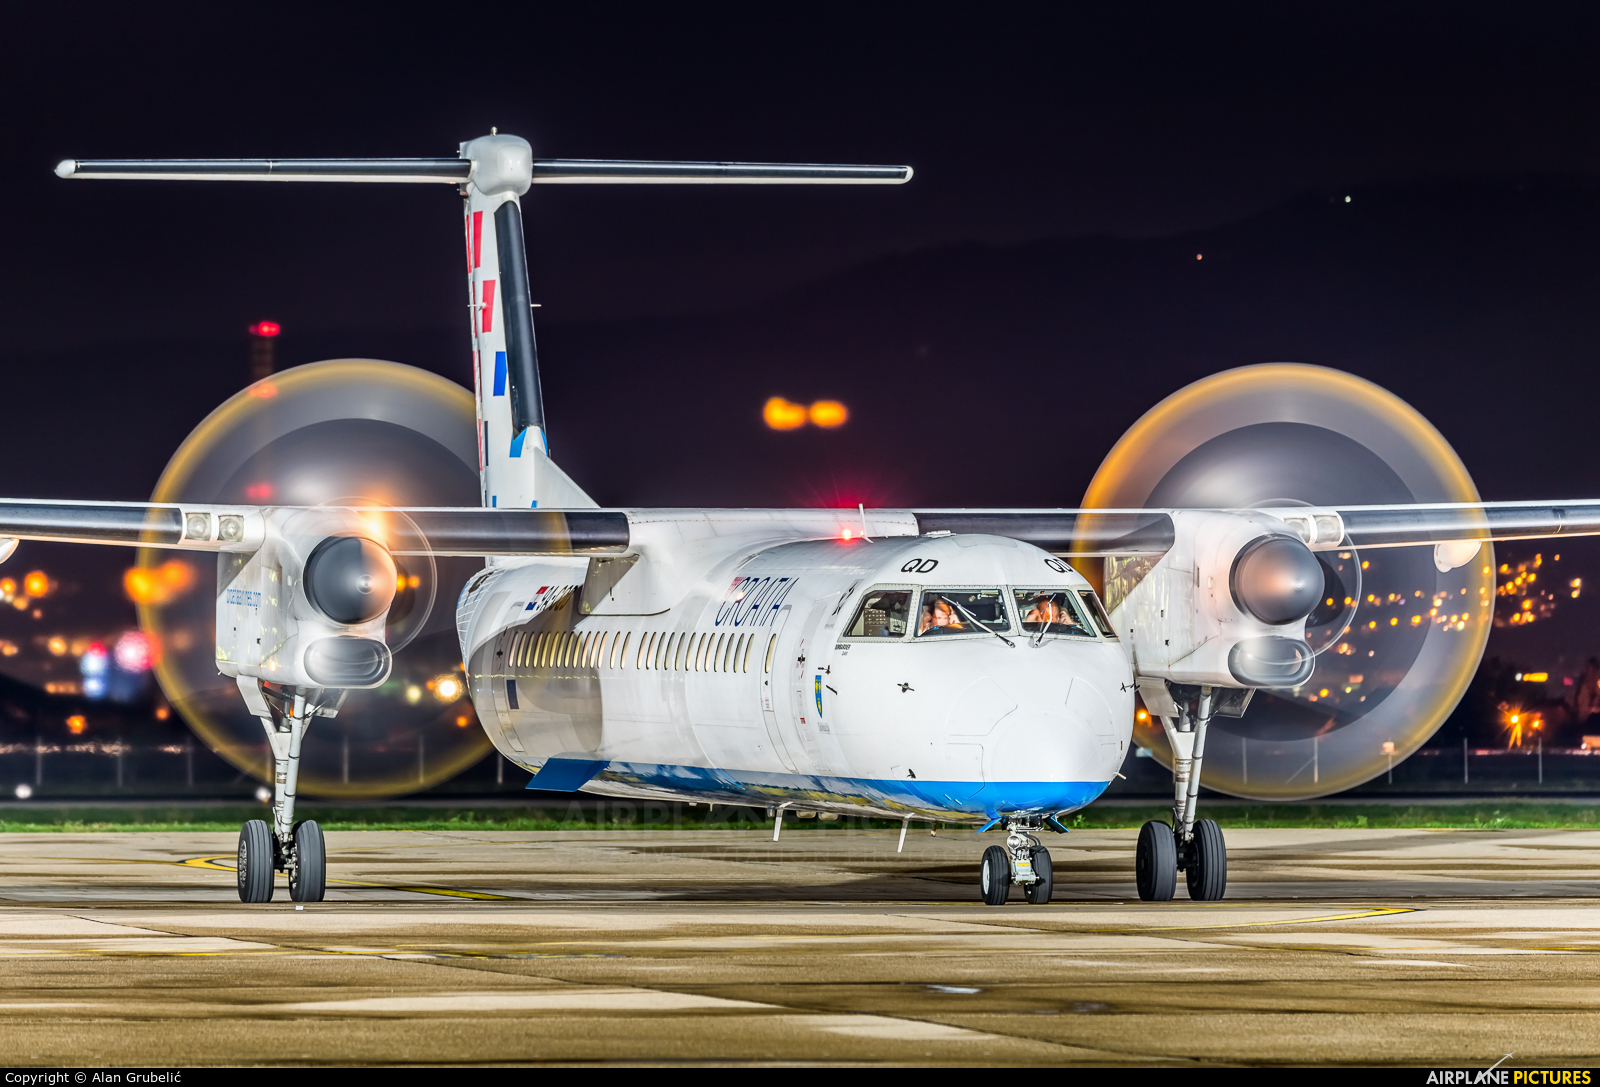 Croatia Airlines 9A-CQD aircraft at Zagreb